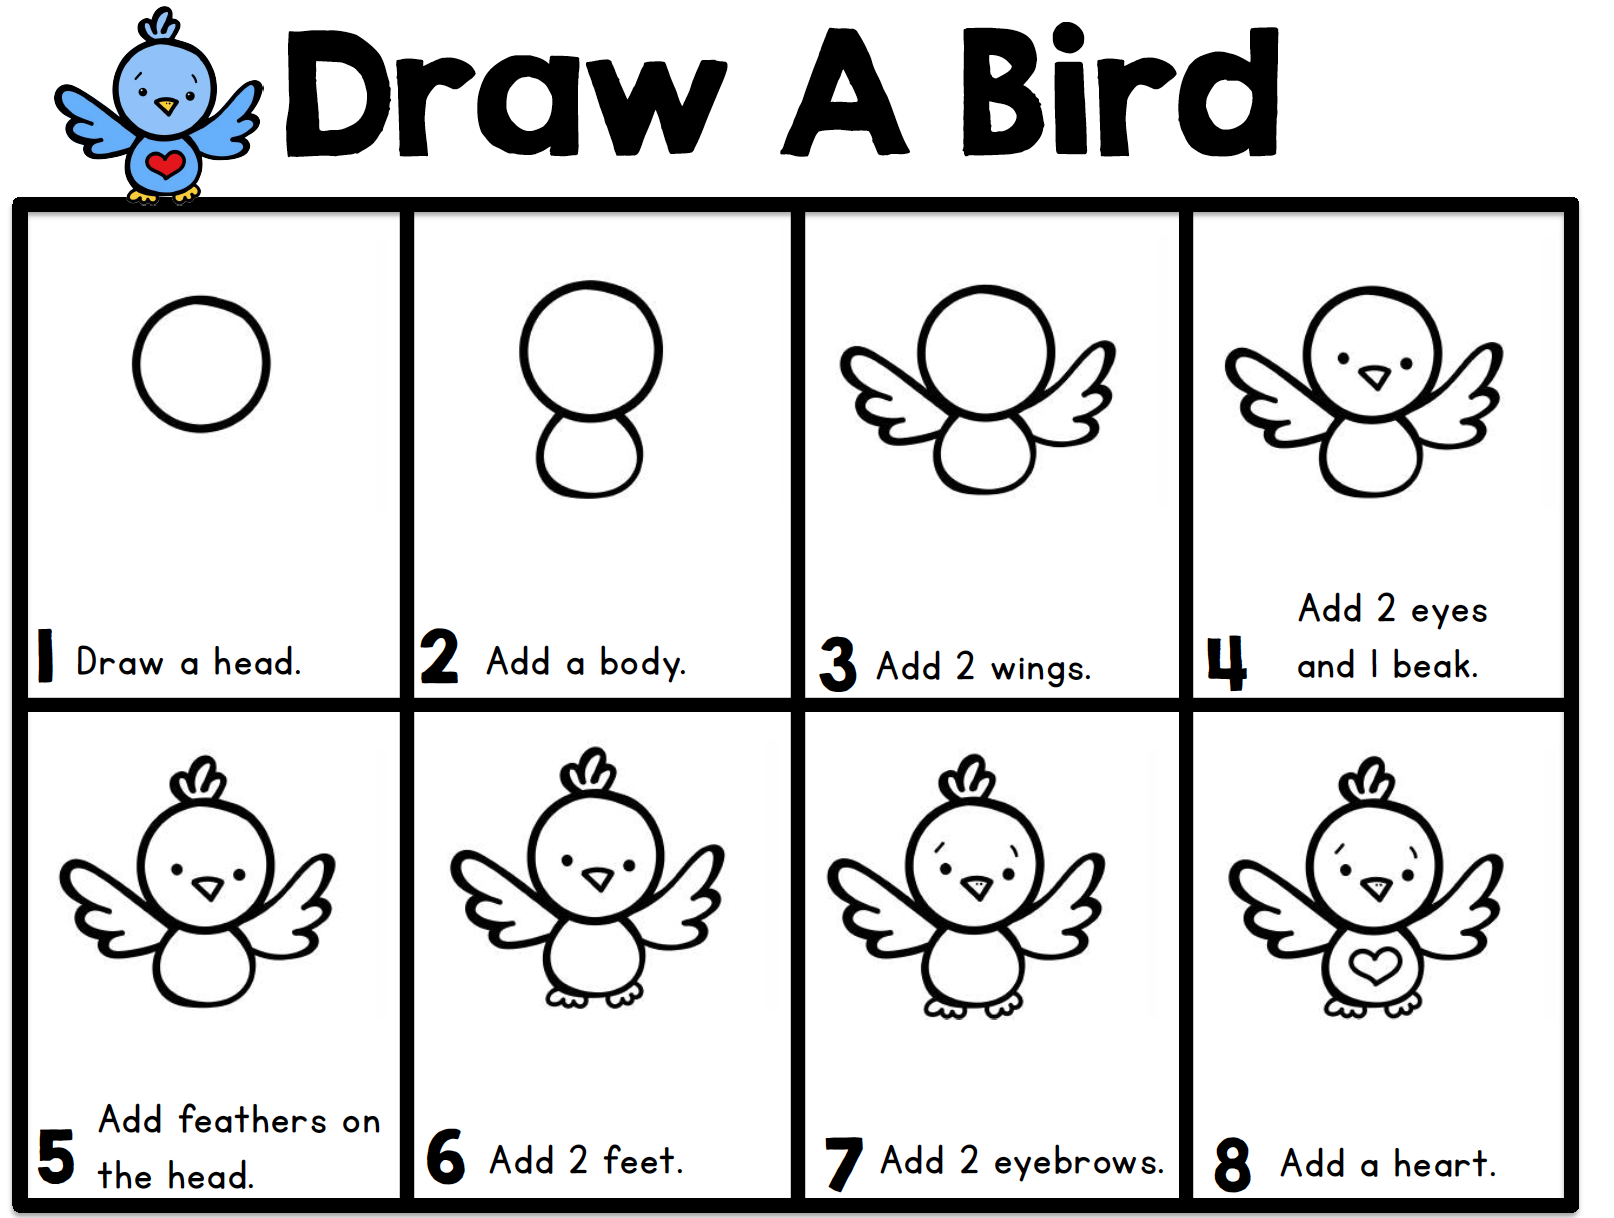 directed-drawing-bird-whimsy-workshop-teaching